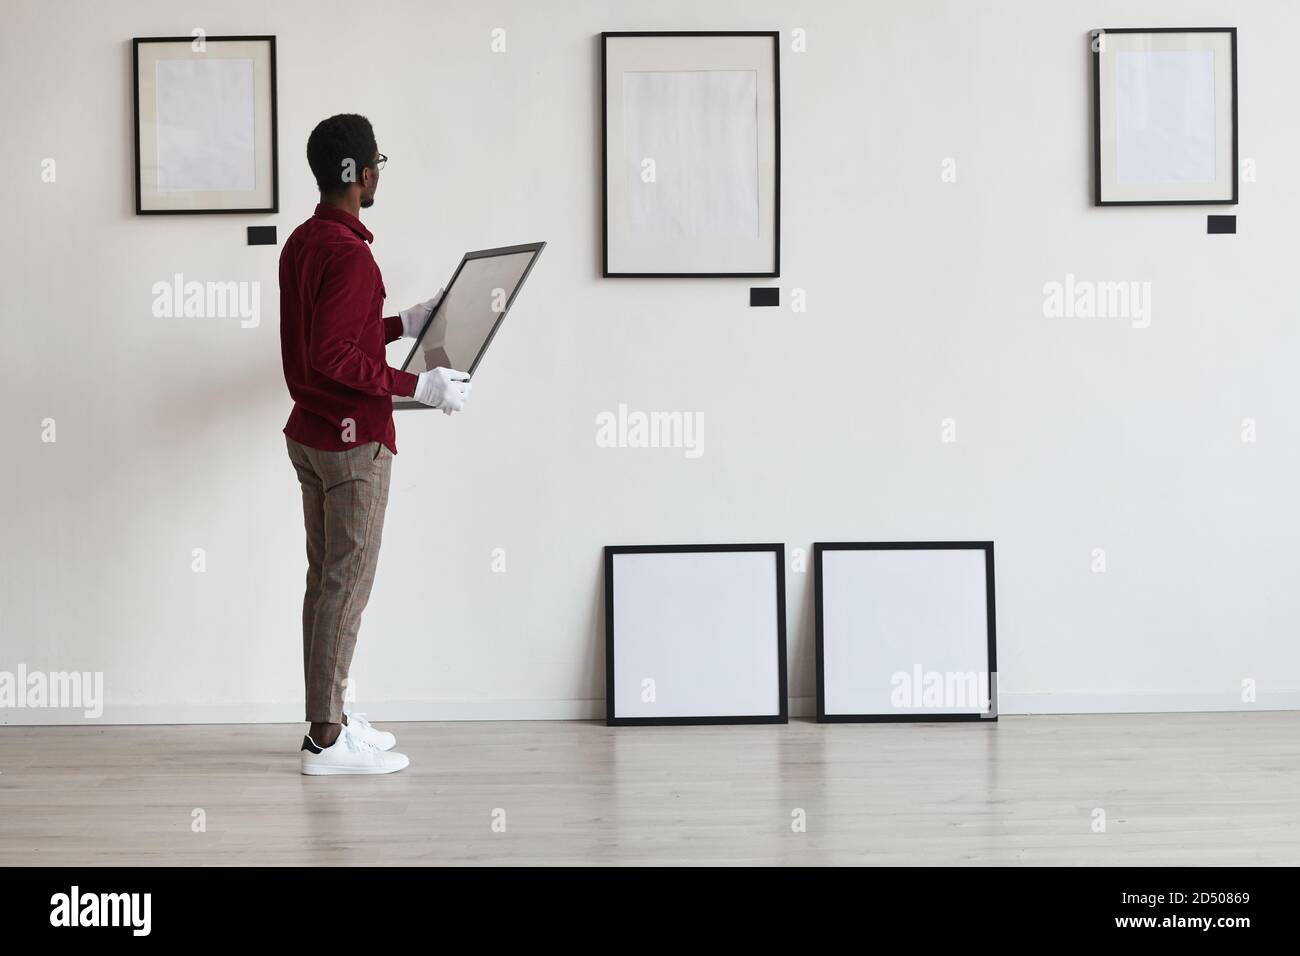 Full length portrait of African-American man planning art gallery or exhibition while setting up frames on white wall, copy space Stock Photo